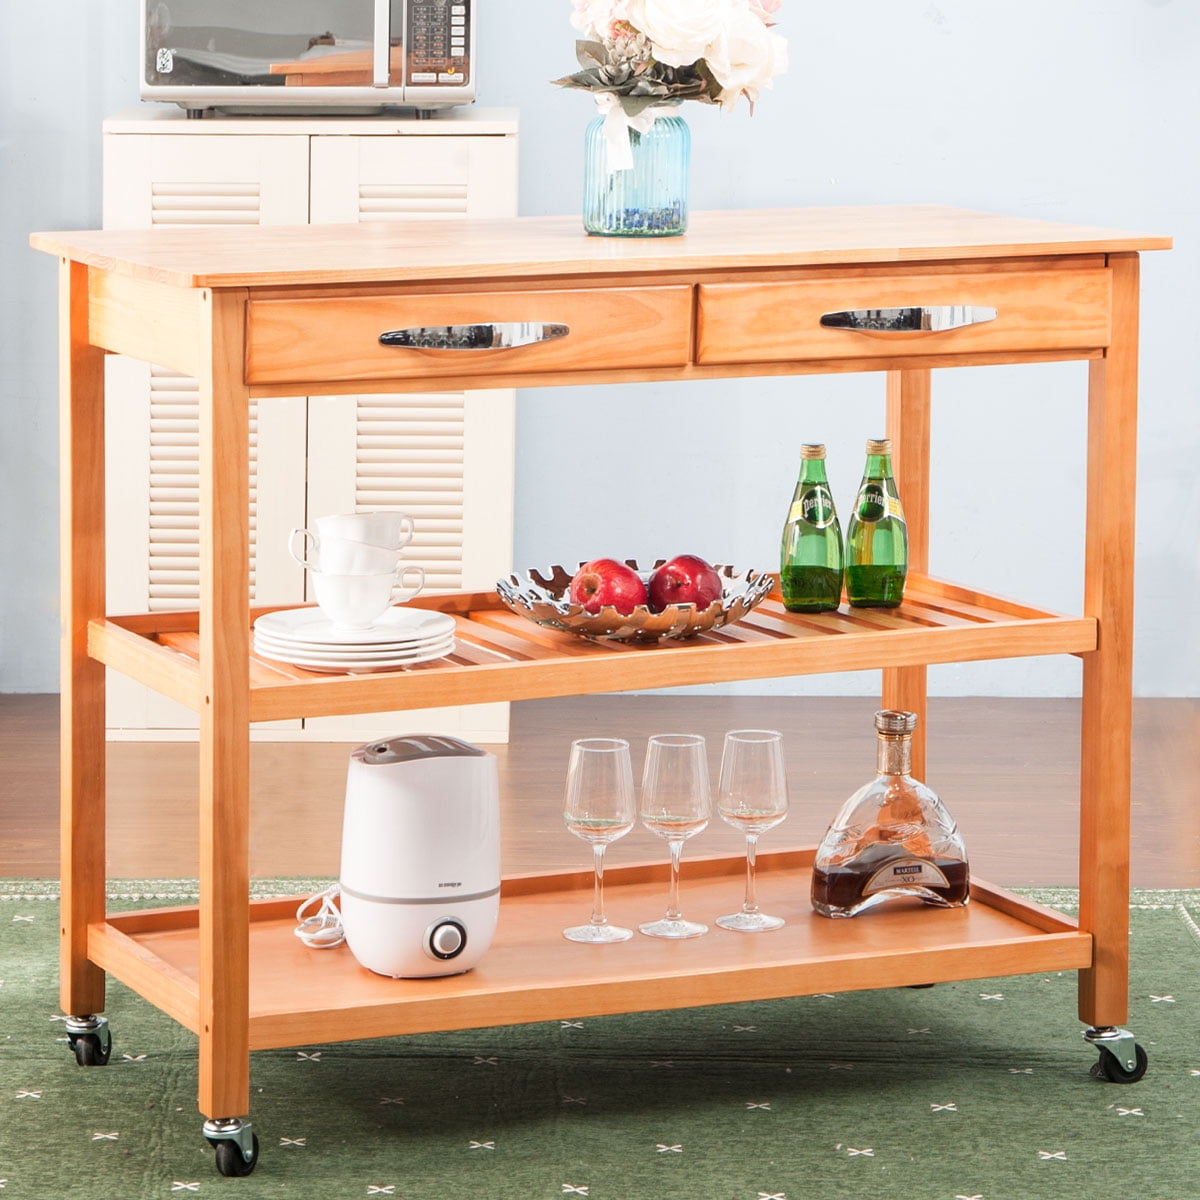 Kitchen Carts on Wheels, 3-Tier Kitchen Island Cart with 2 Drawers and